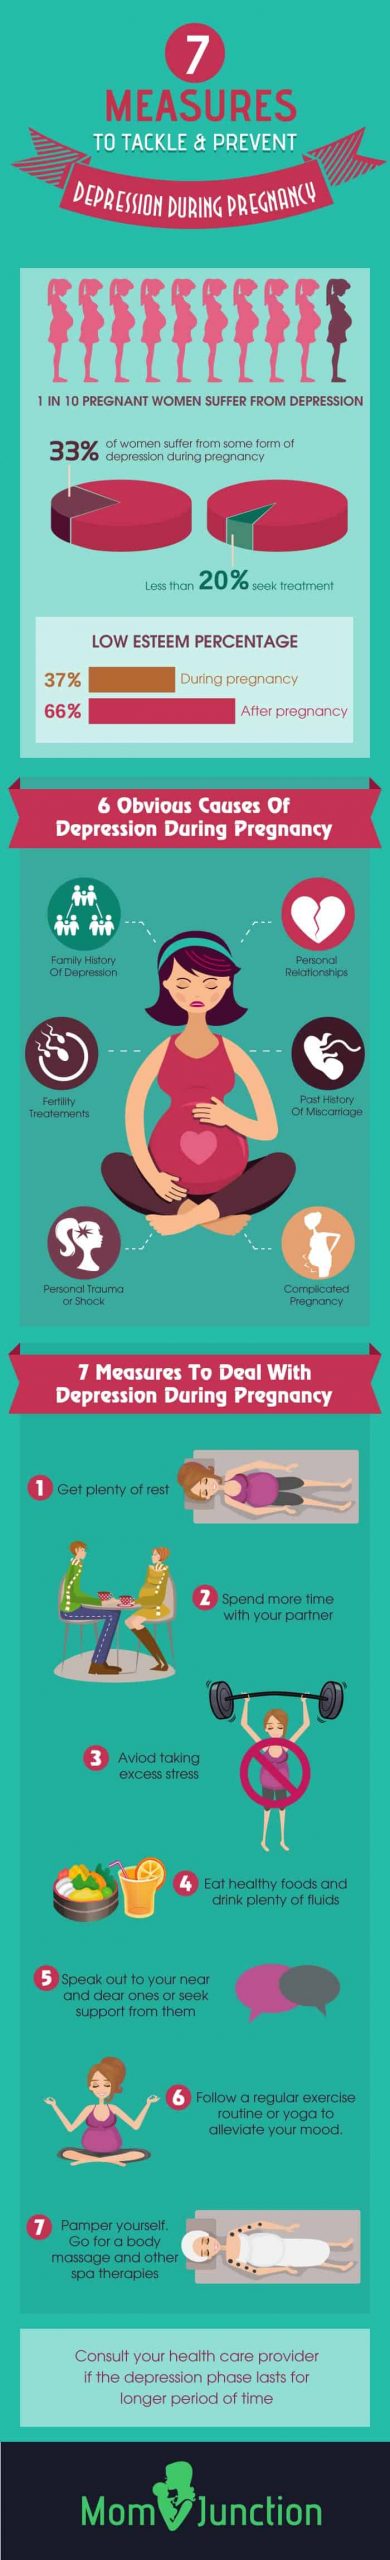 7 Measures To Deal With Depression During Pregnancy